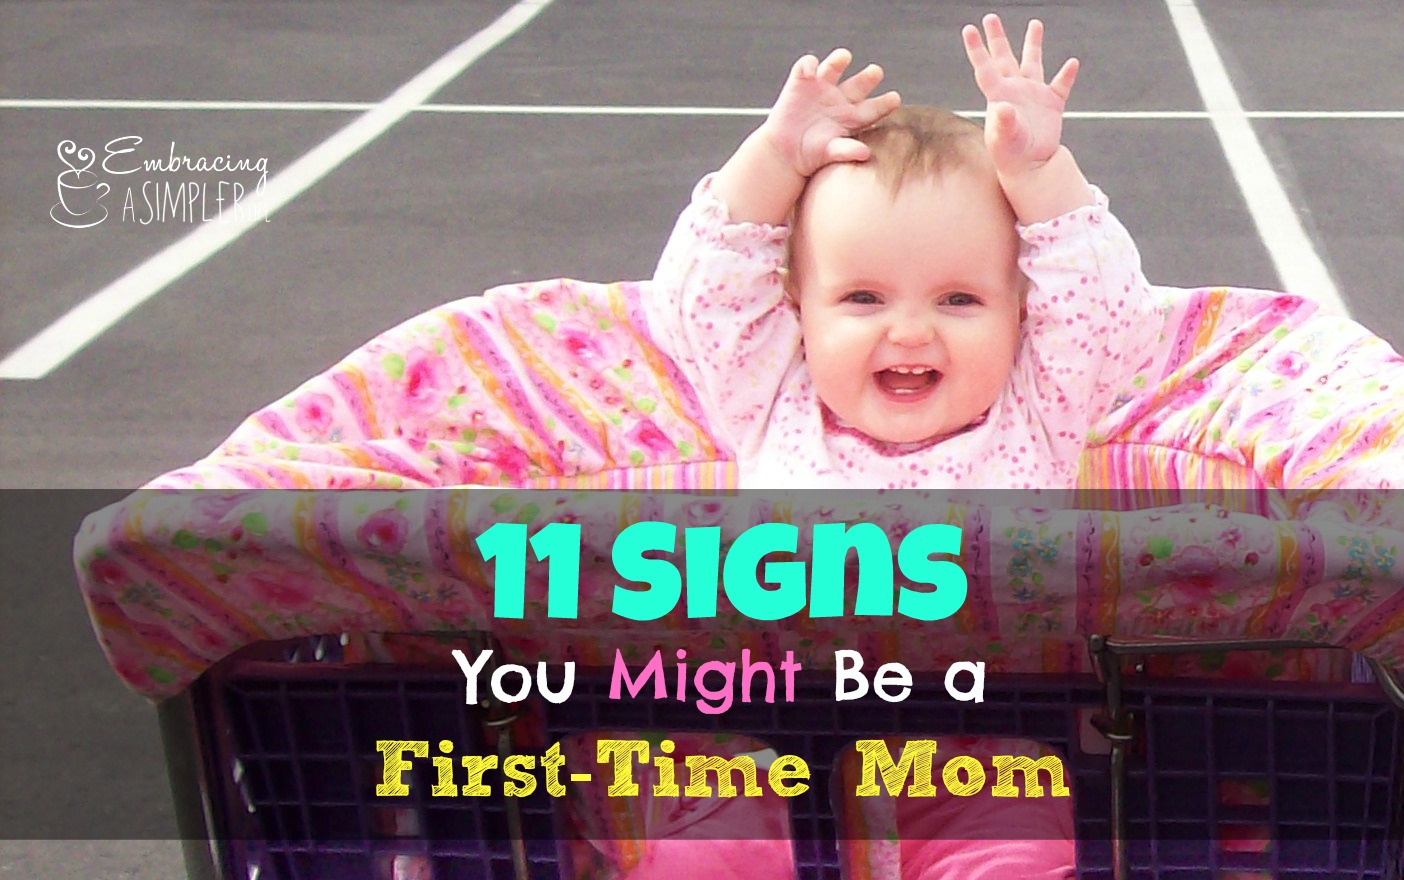 Signs you might be a first-time mom